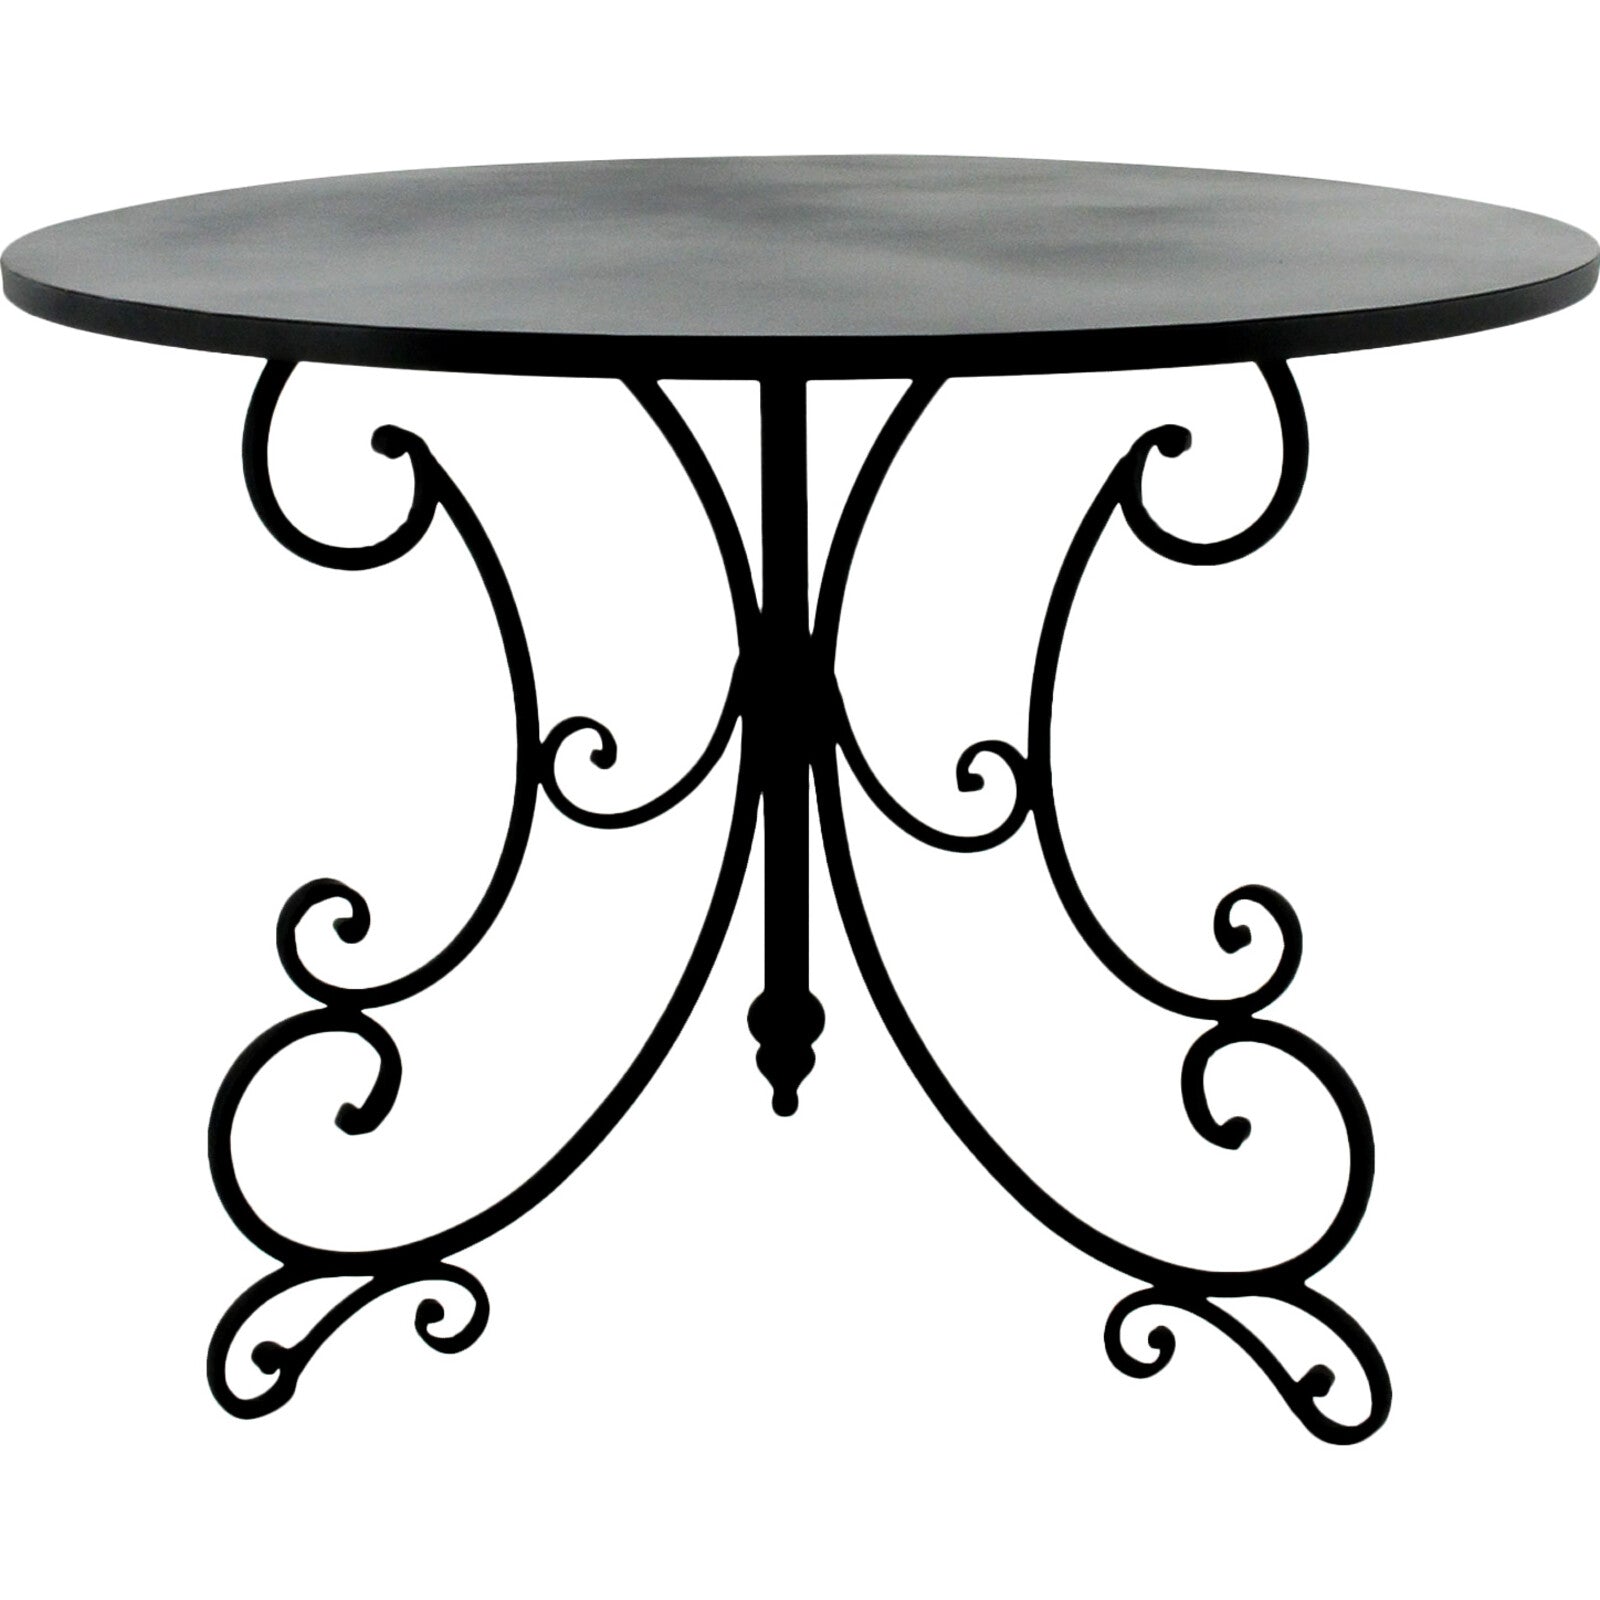 French Garden Table